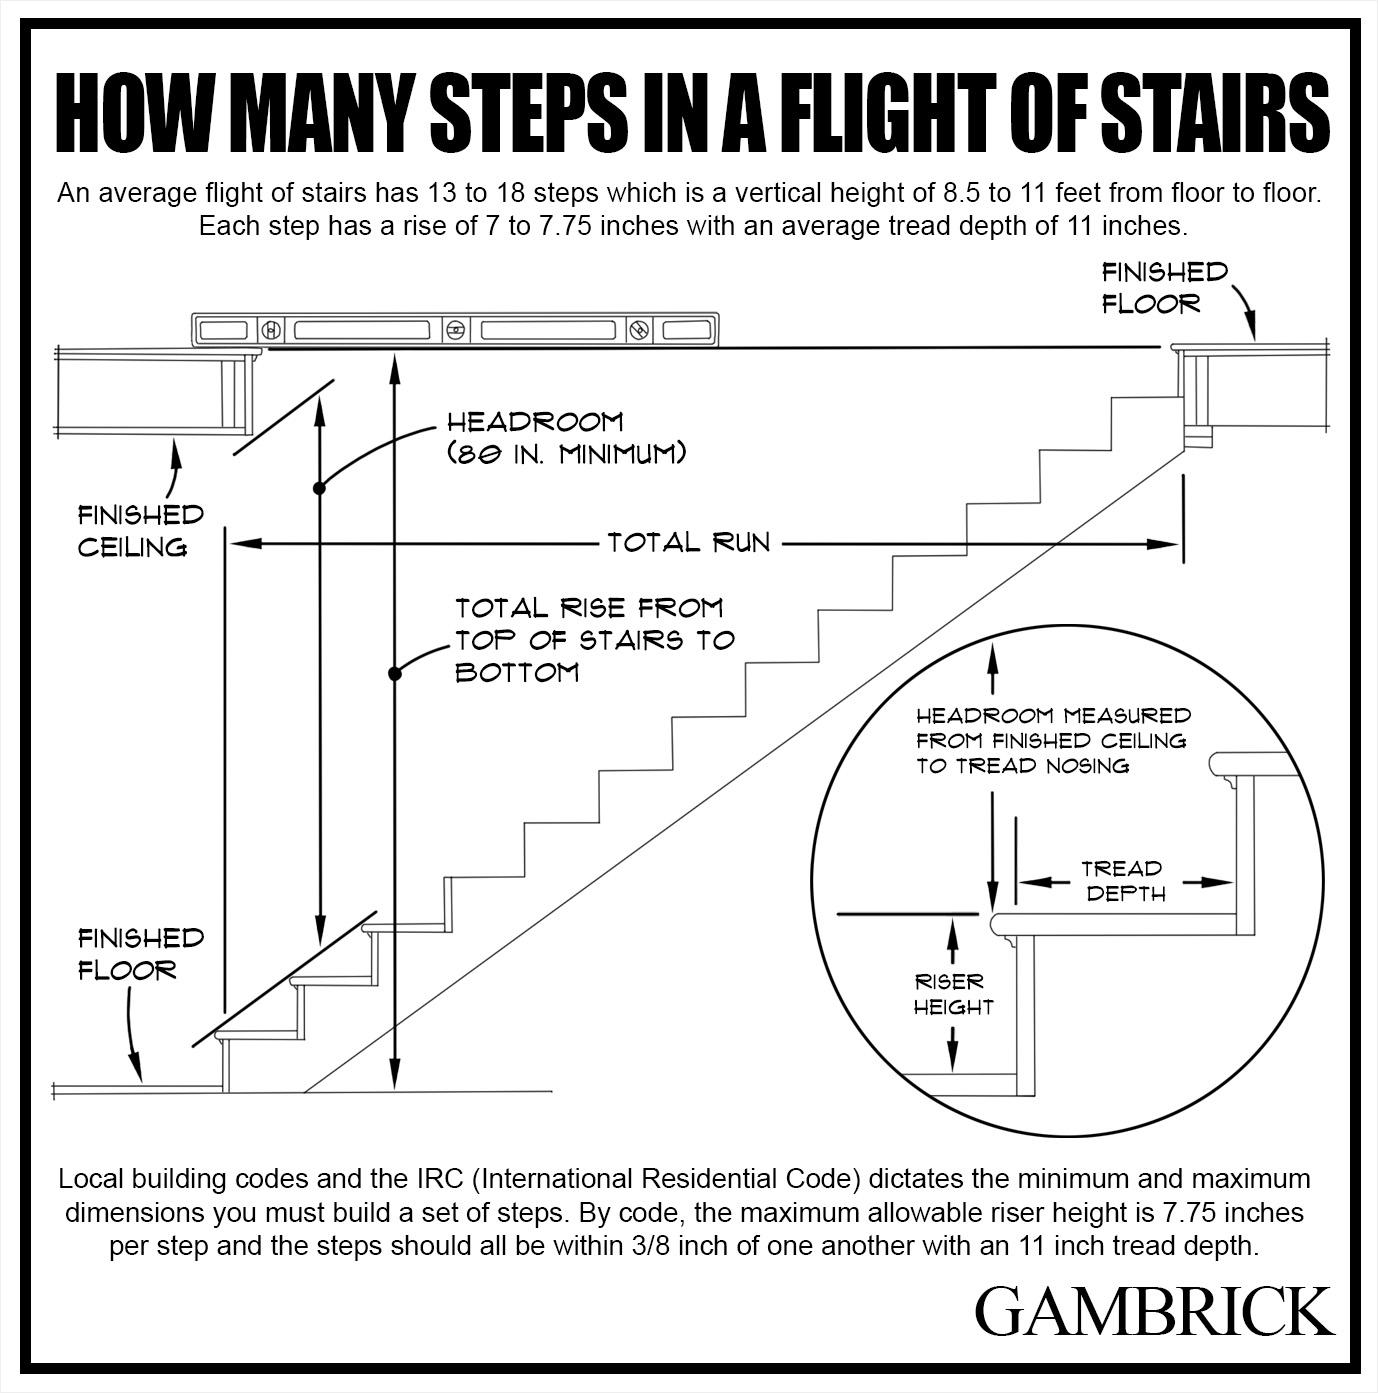 how many steps in a flight of stairs infographic chart 2.1